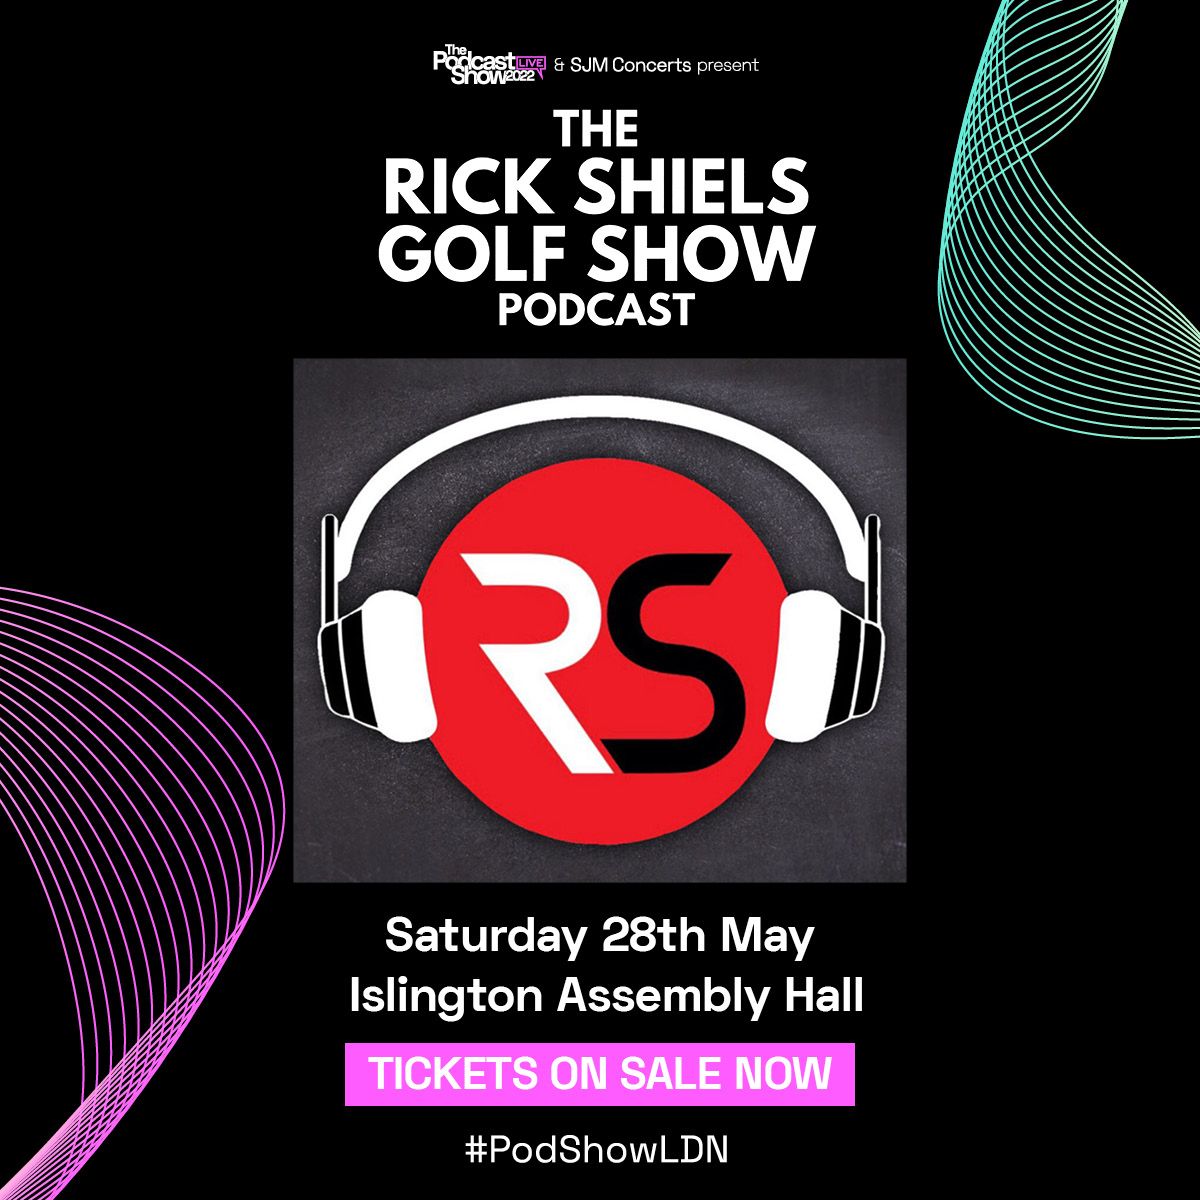 The Rick Shiels Golf Show Podcast